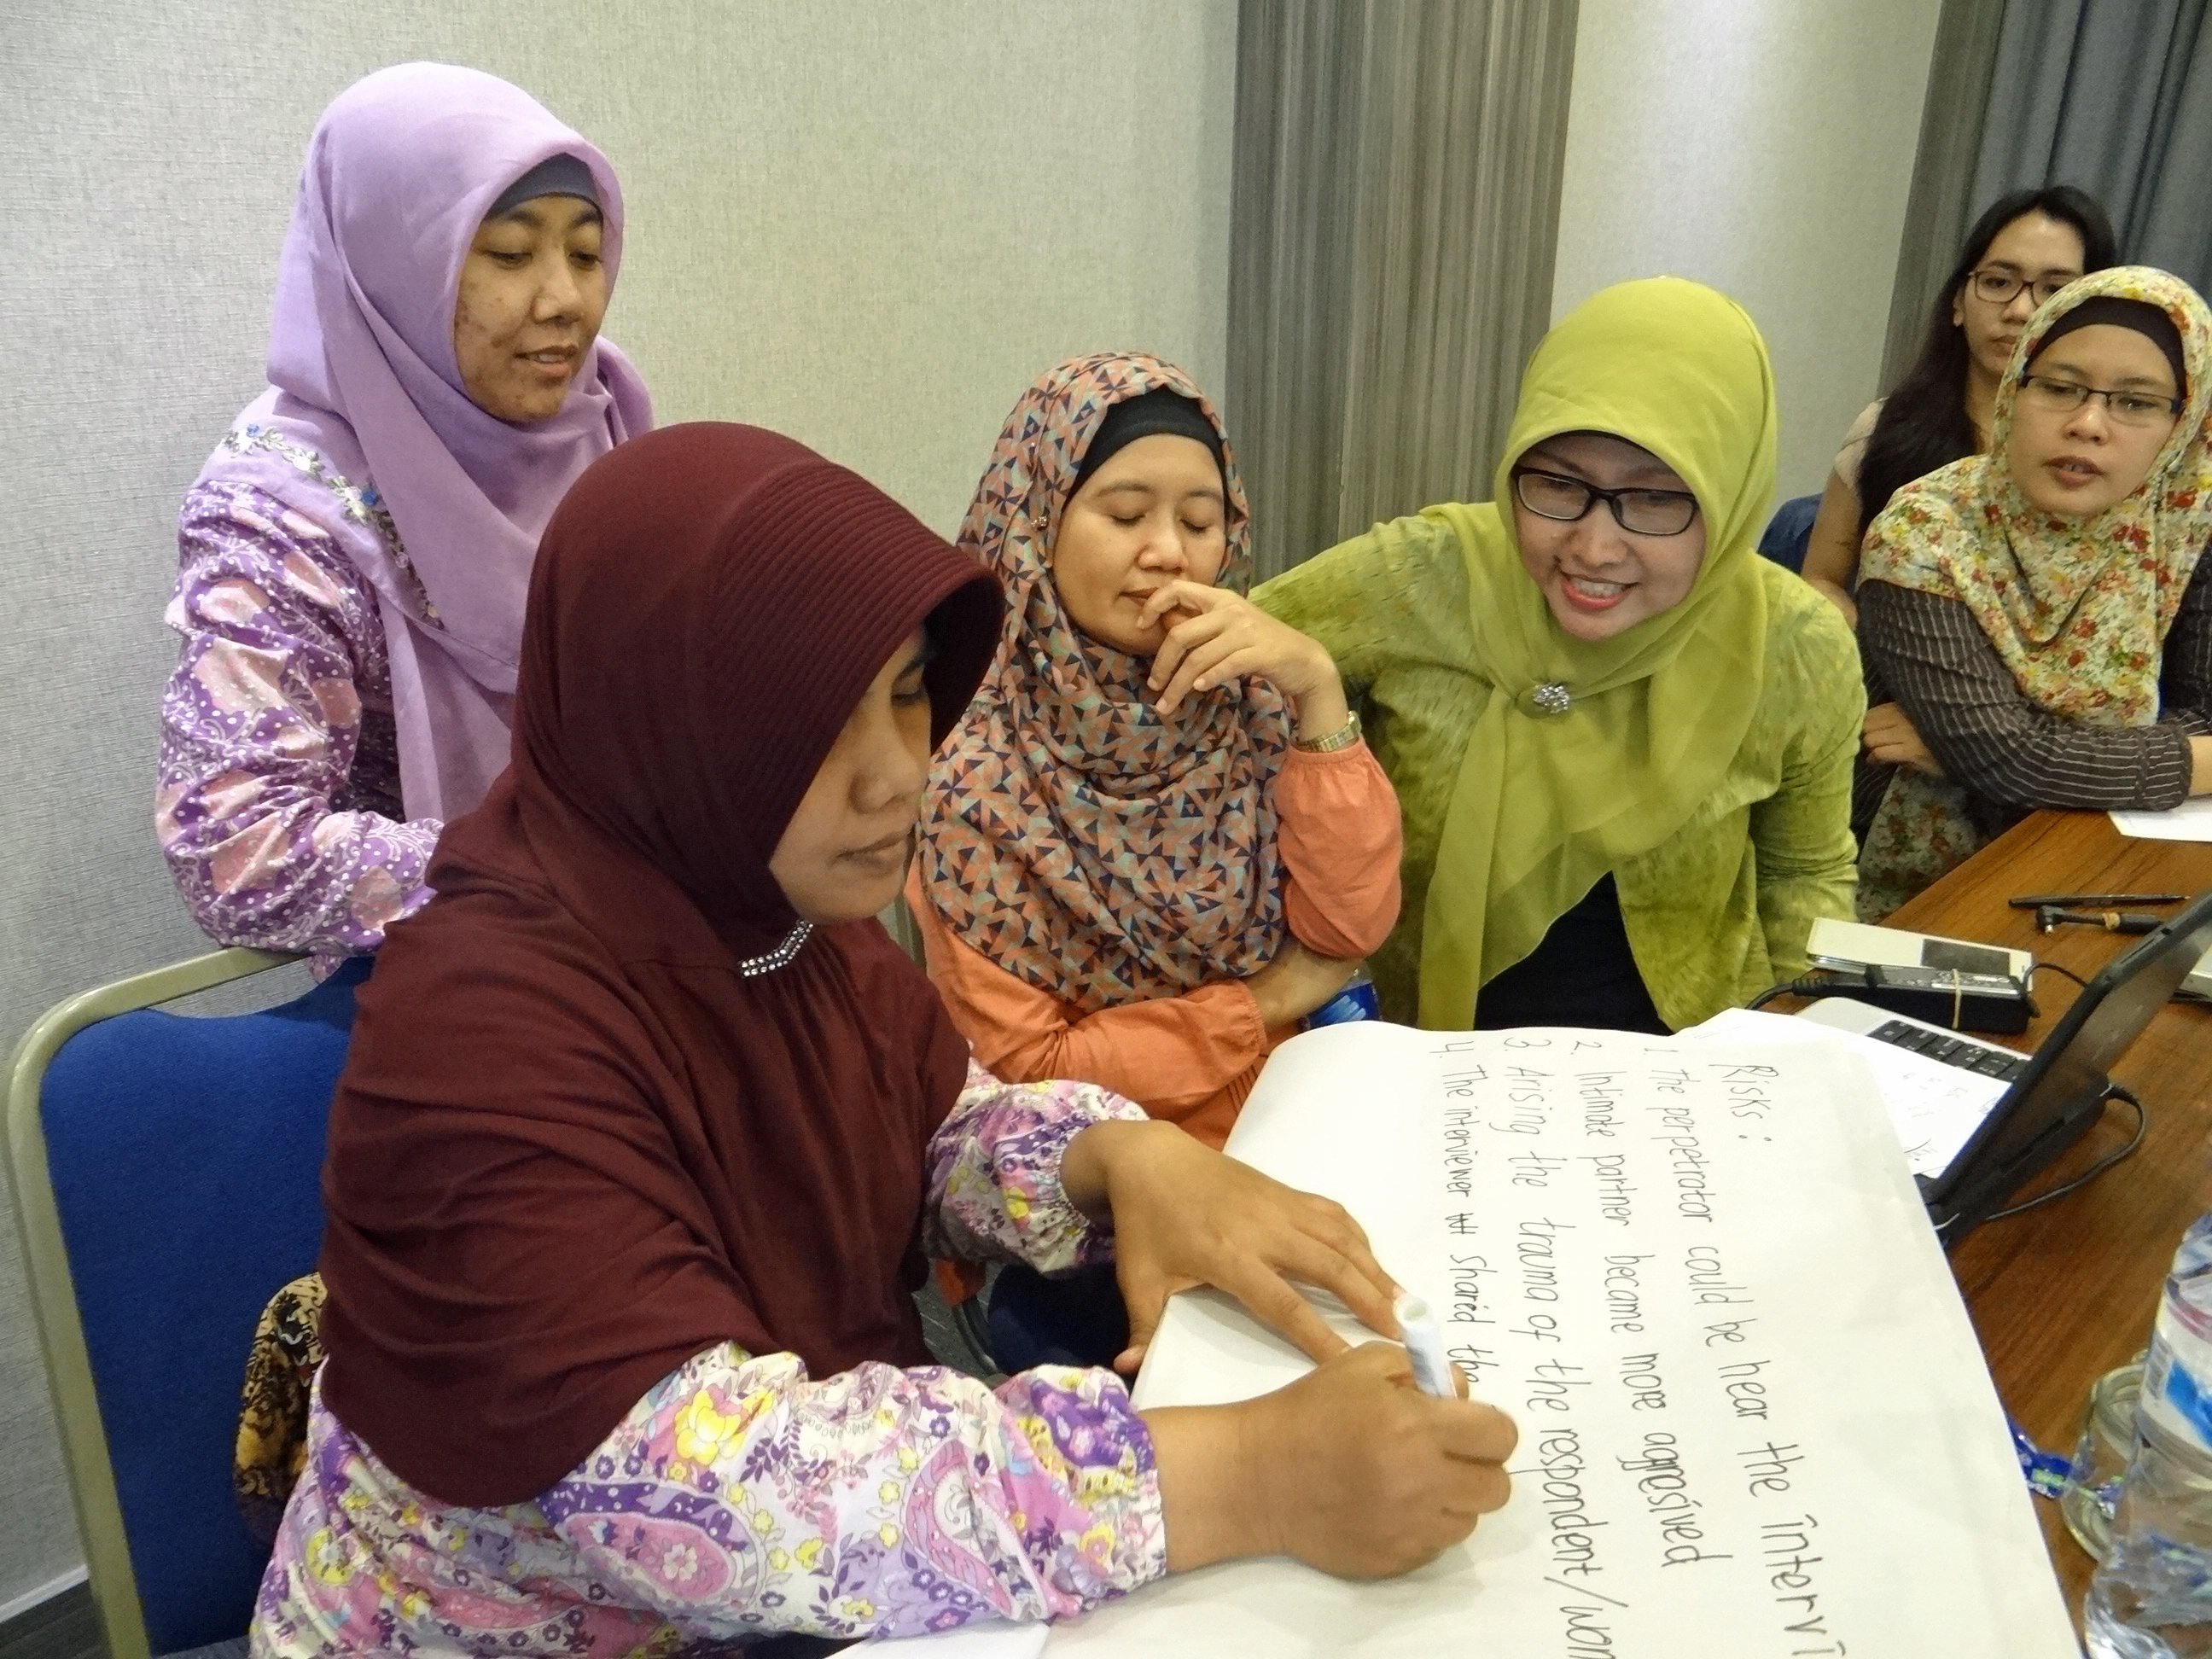 Women work as part of a violence against women data collection training